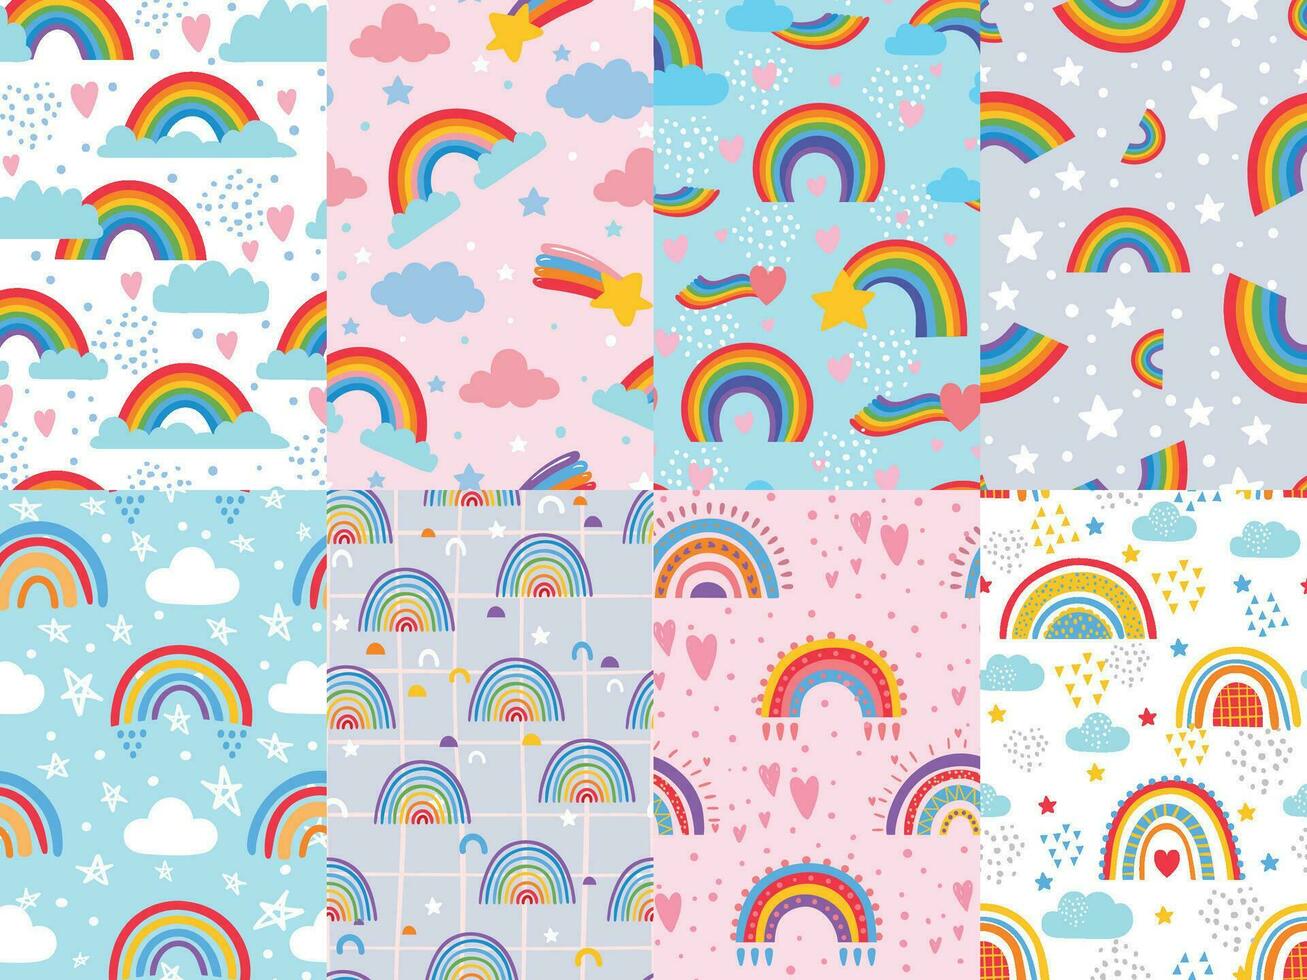 Seamless rainbow pattern. Stars, clouds and rainbows in sky, colorful arc decoration backdrop vector illustration set